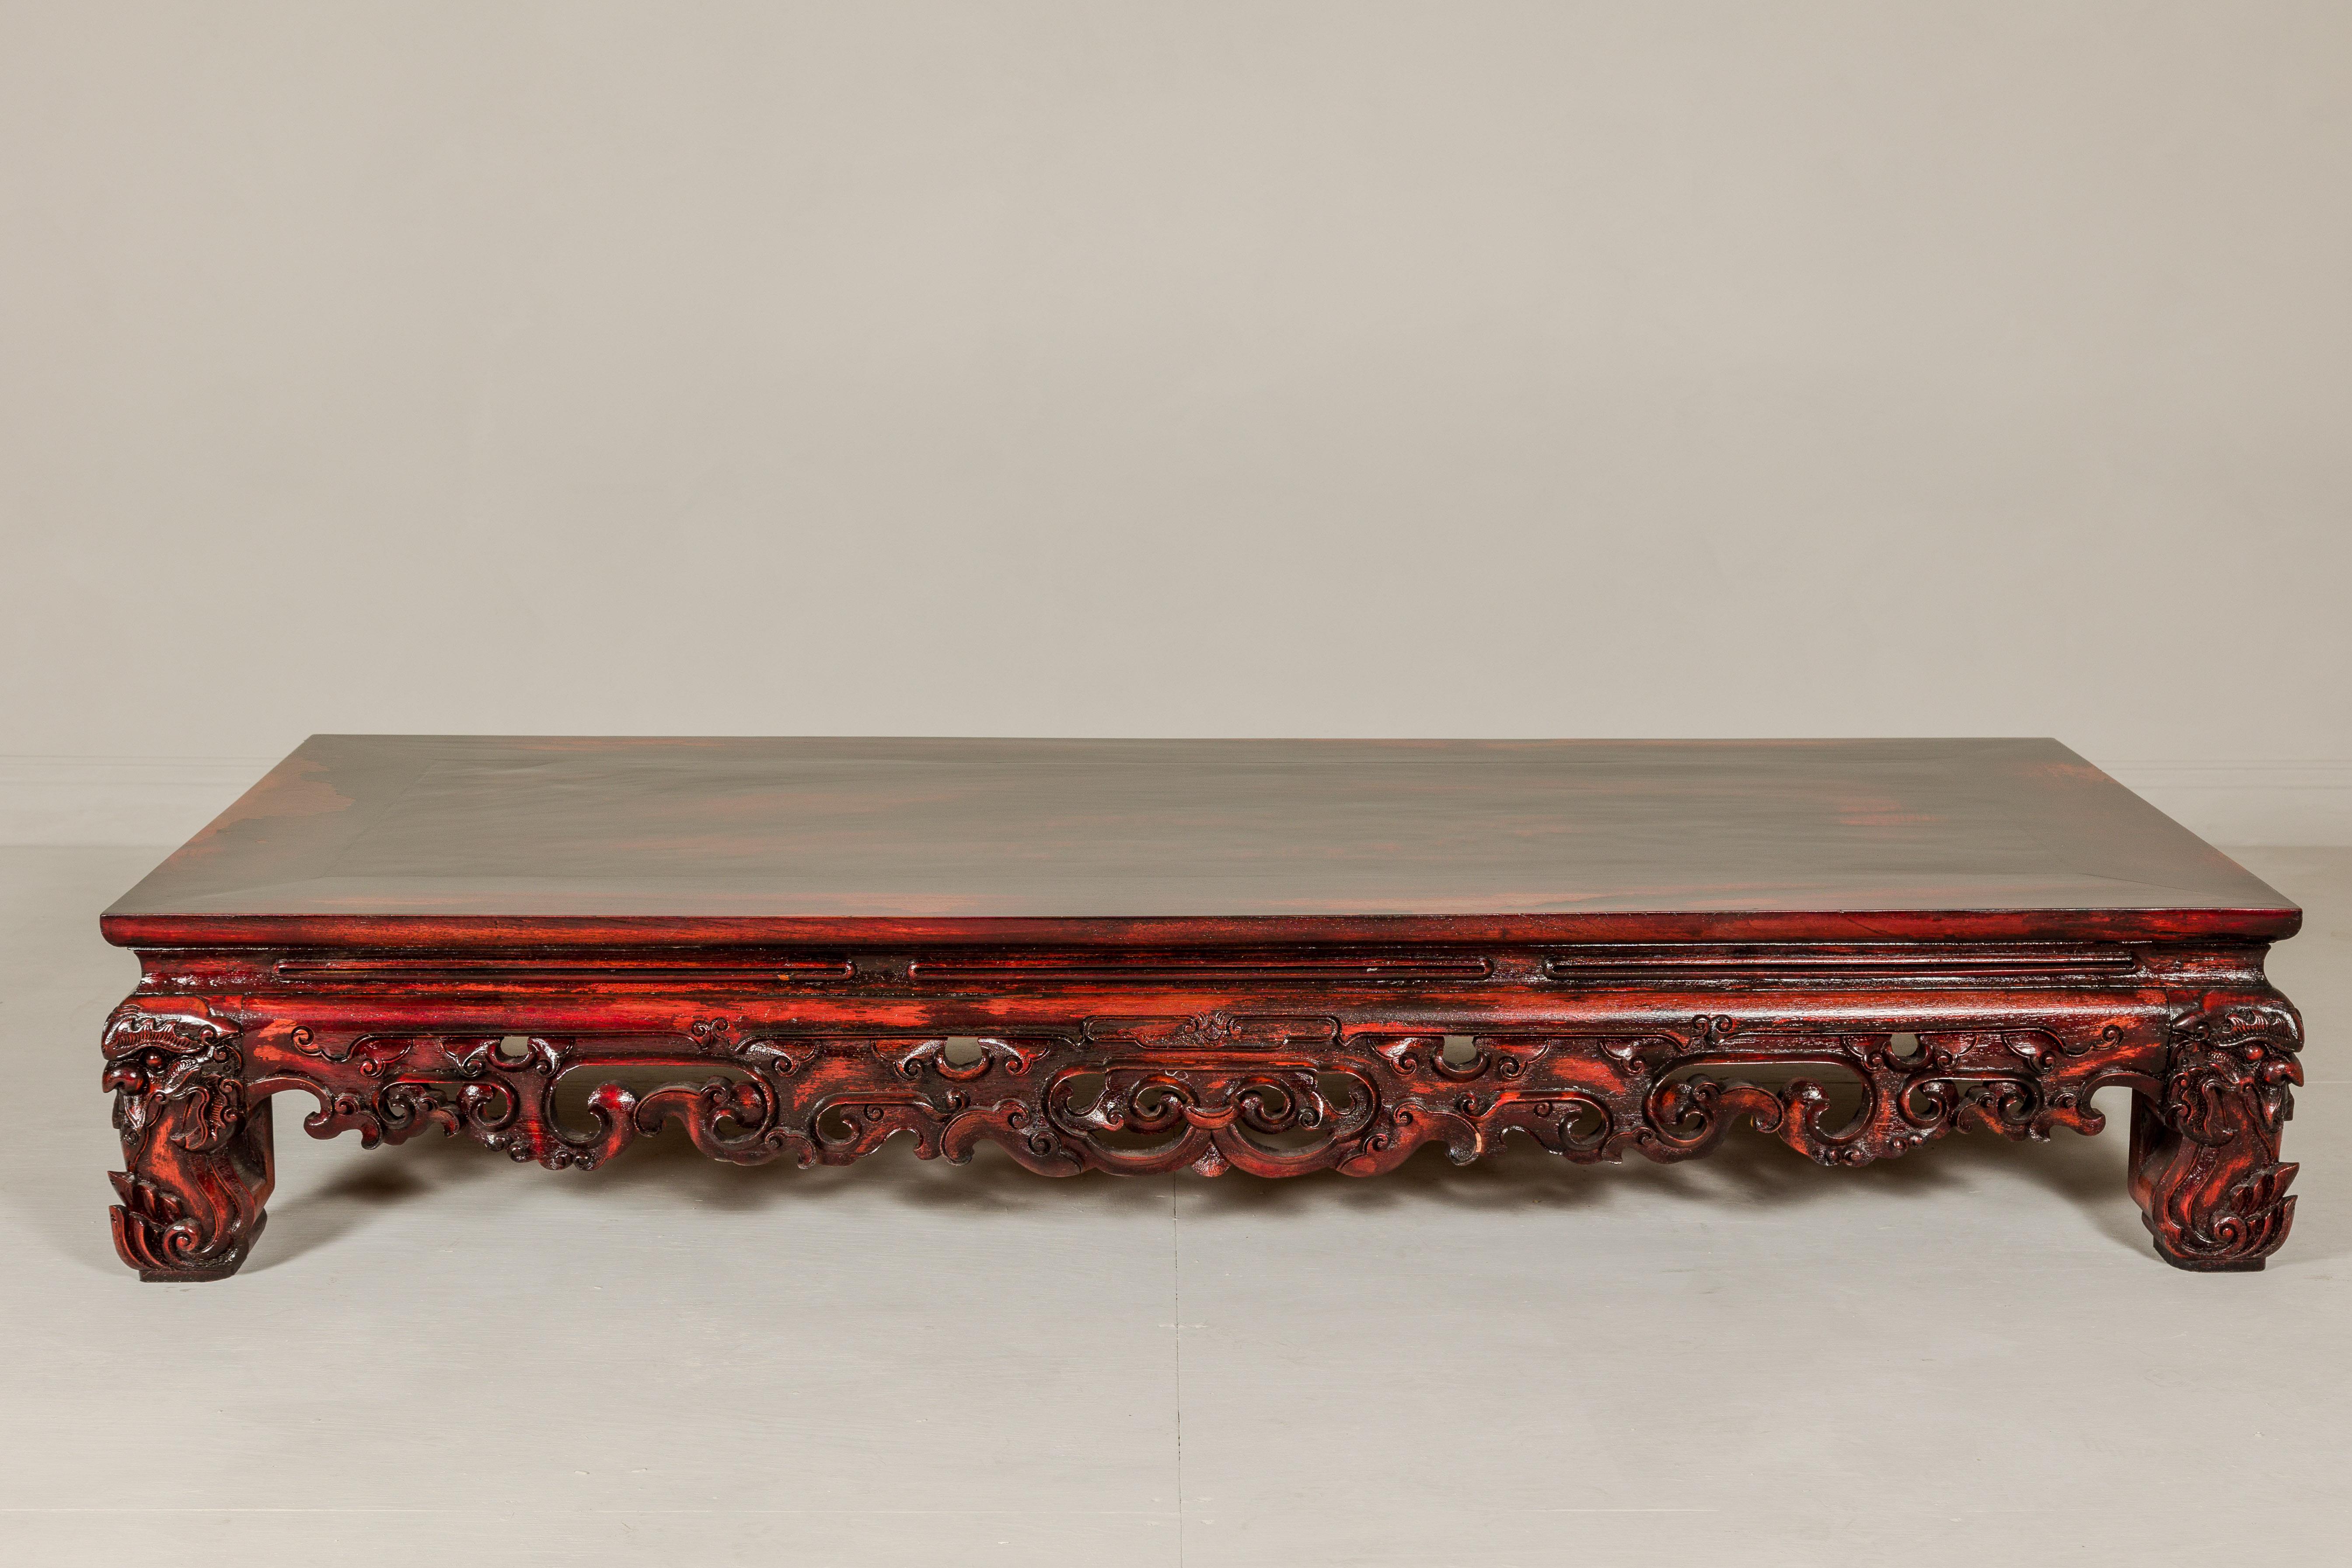 Qing Dynasty Low Kang Coffee Table with Reddish Brown Finish and Carved Décor For Sale 8